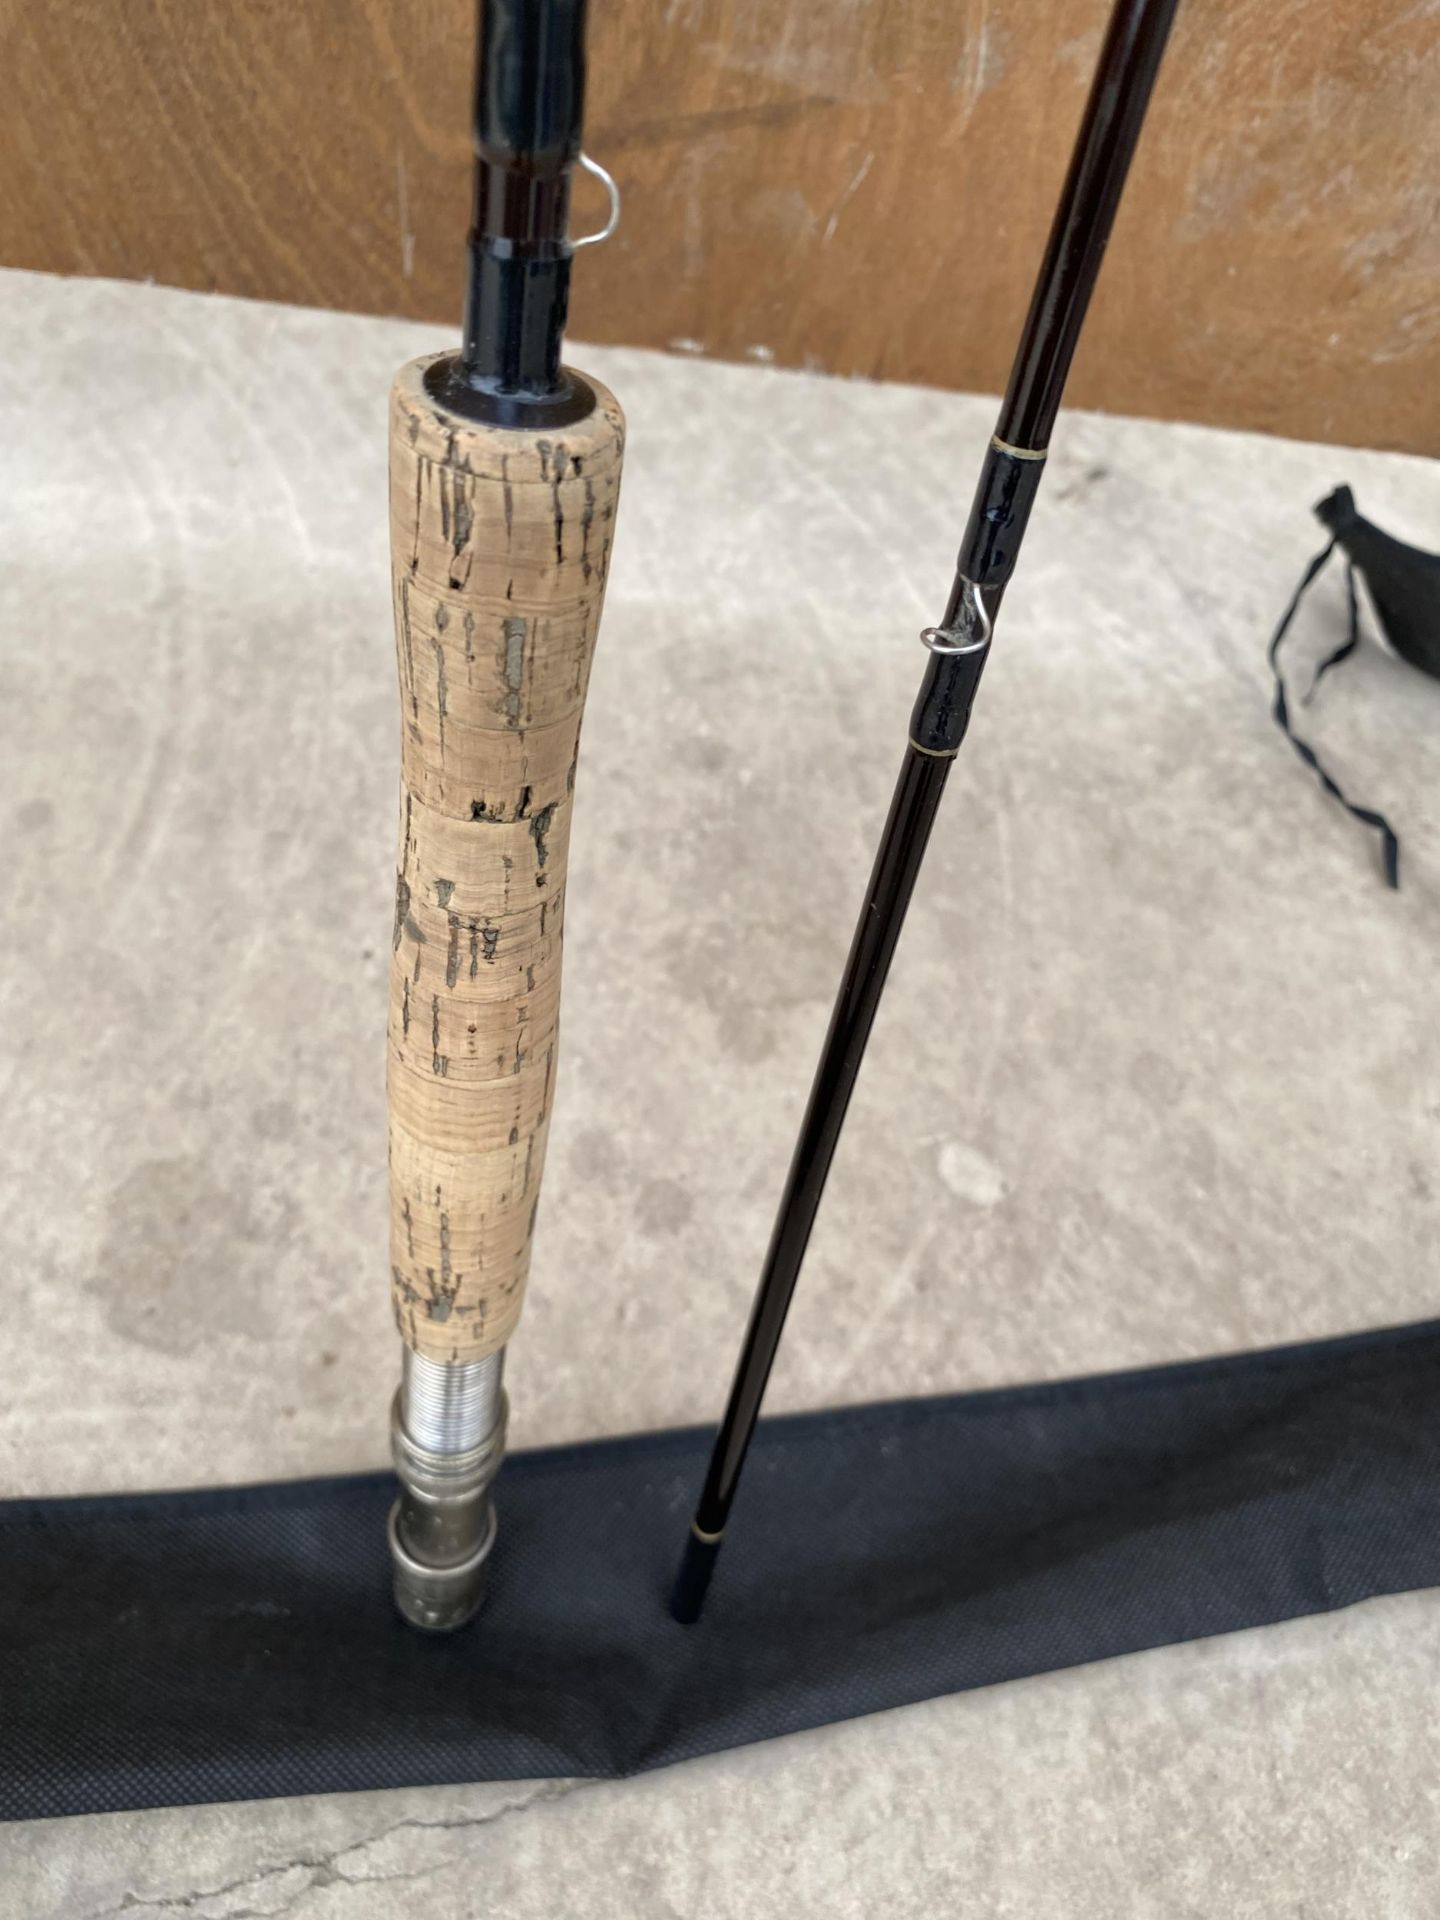 TWO FLY FISHING RODS CONSISTING OF AN ASTROBLACK 9'6" 8-9# AND A SHAKESPERE SIGMA GRAPHITE 8'10" 6- - Image 9 of 9